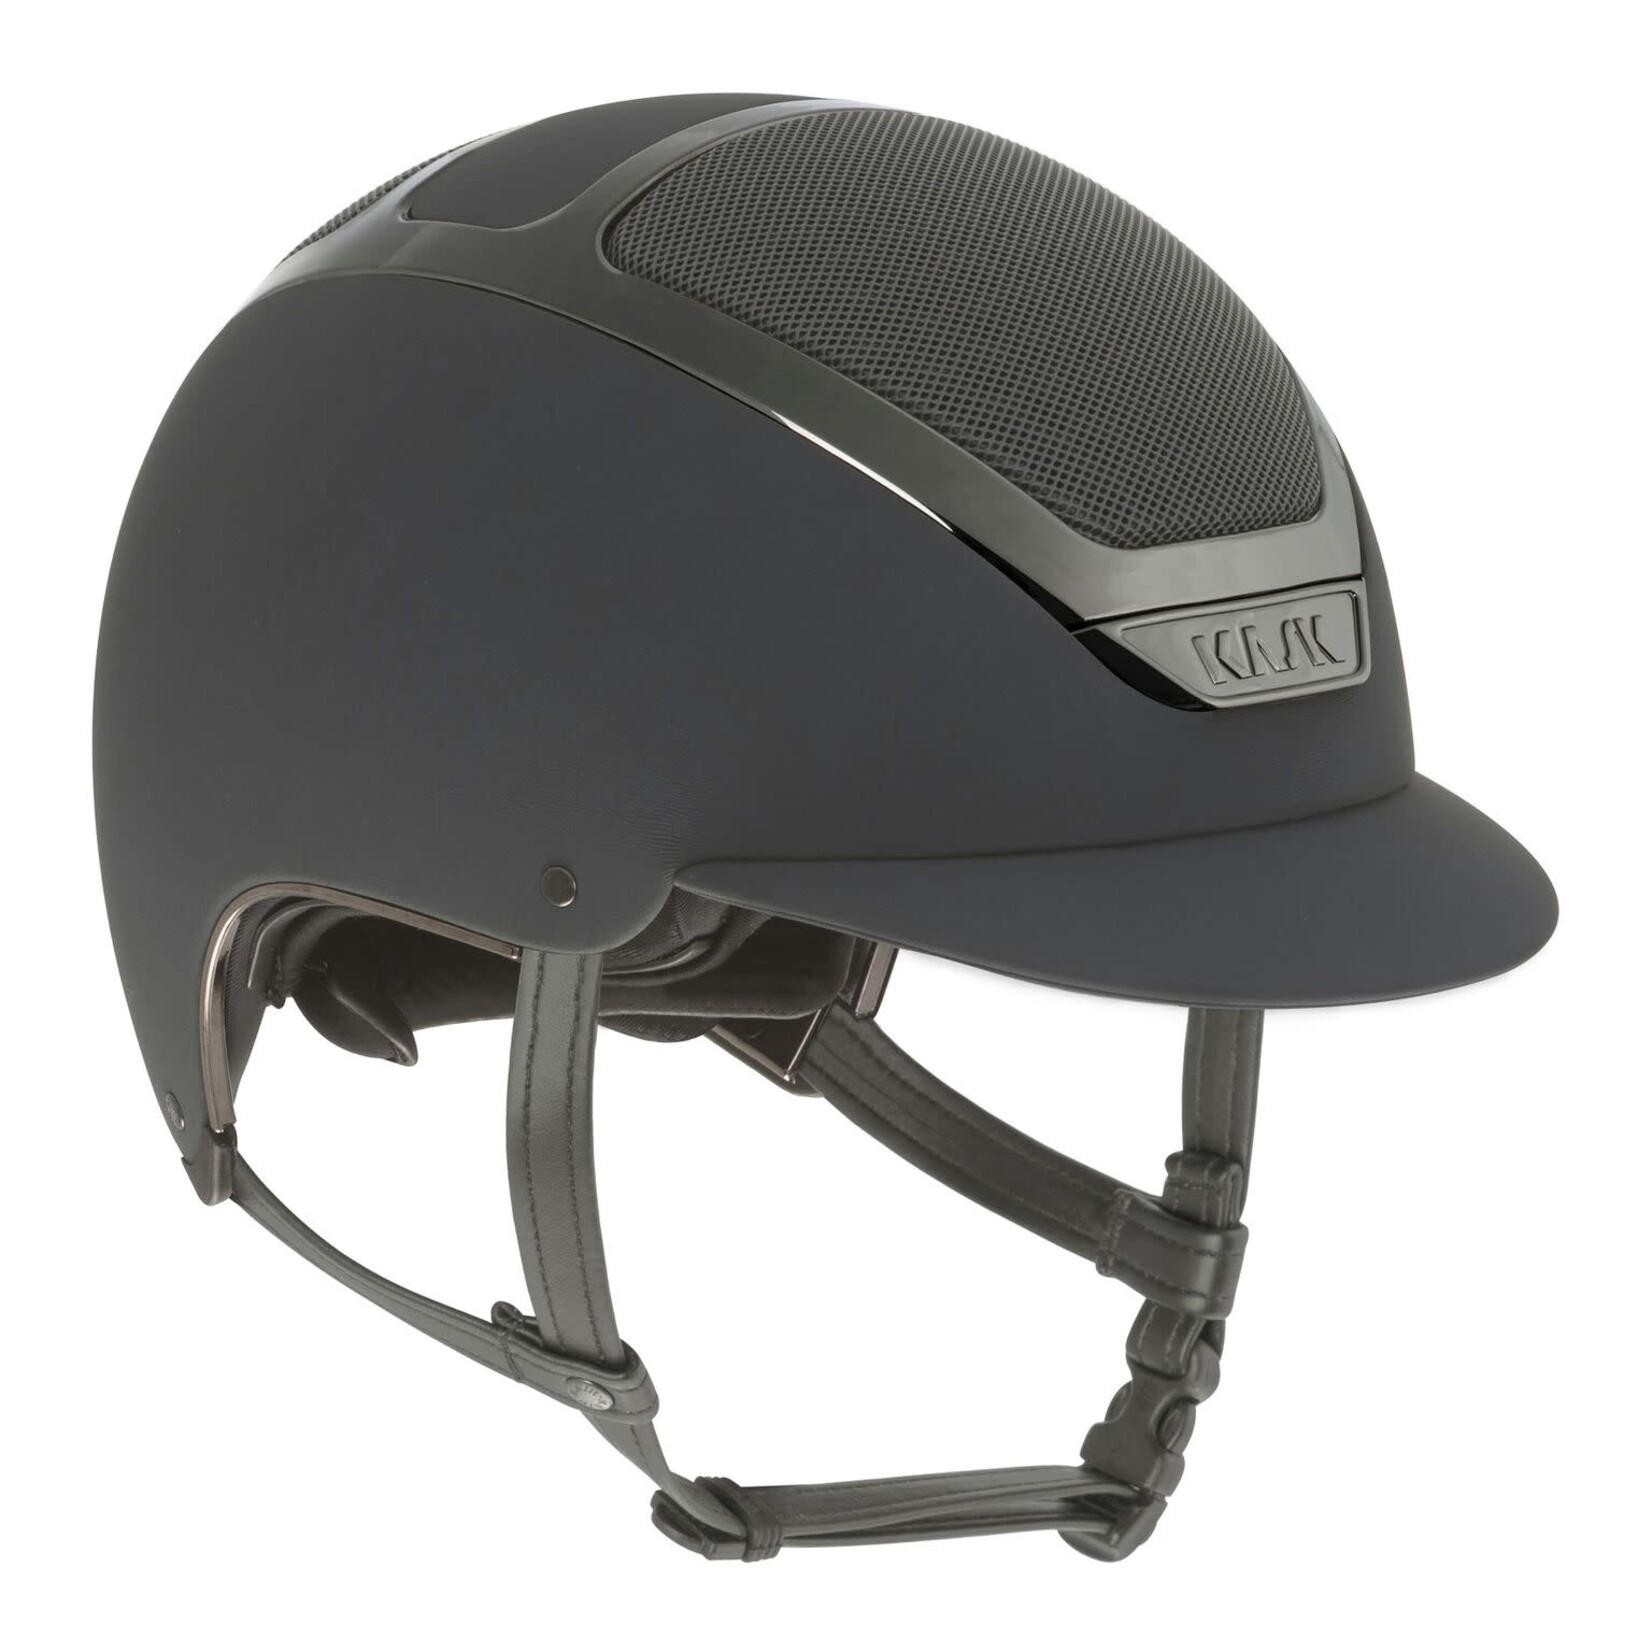 KASK Equestrian Kask WG11 Dogma Chrome Riding Helmet- Sold as a kit with coordinating liner (sold separately)